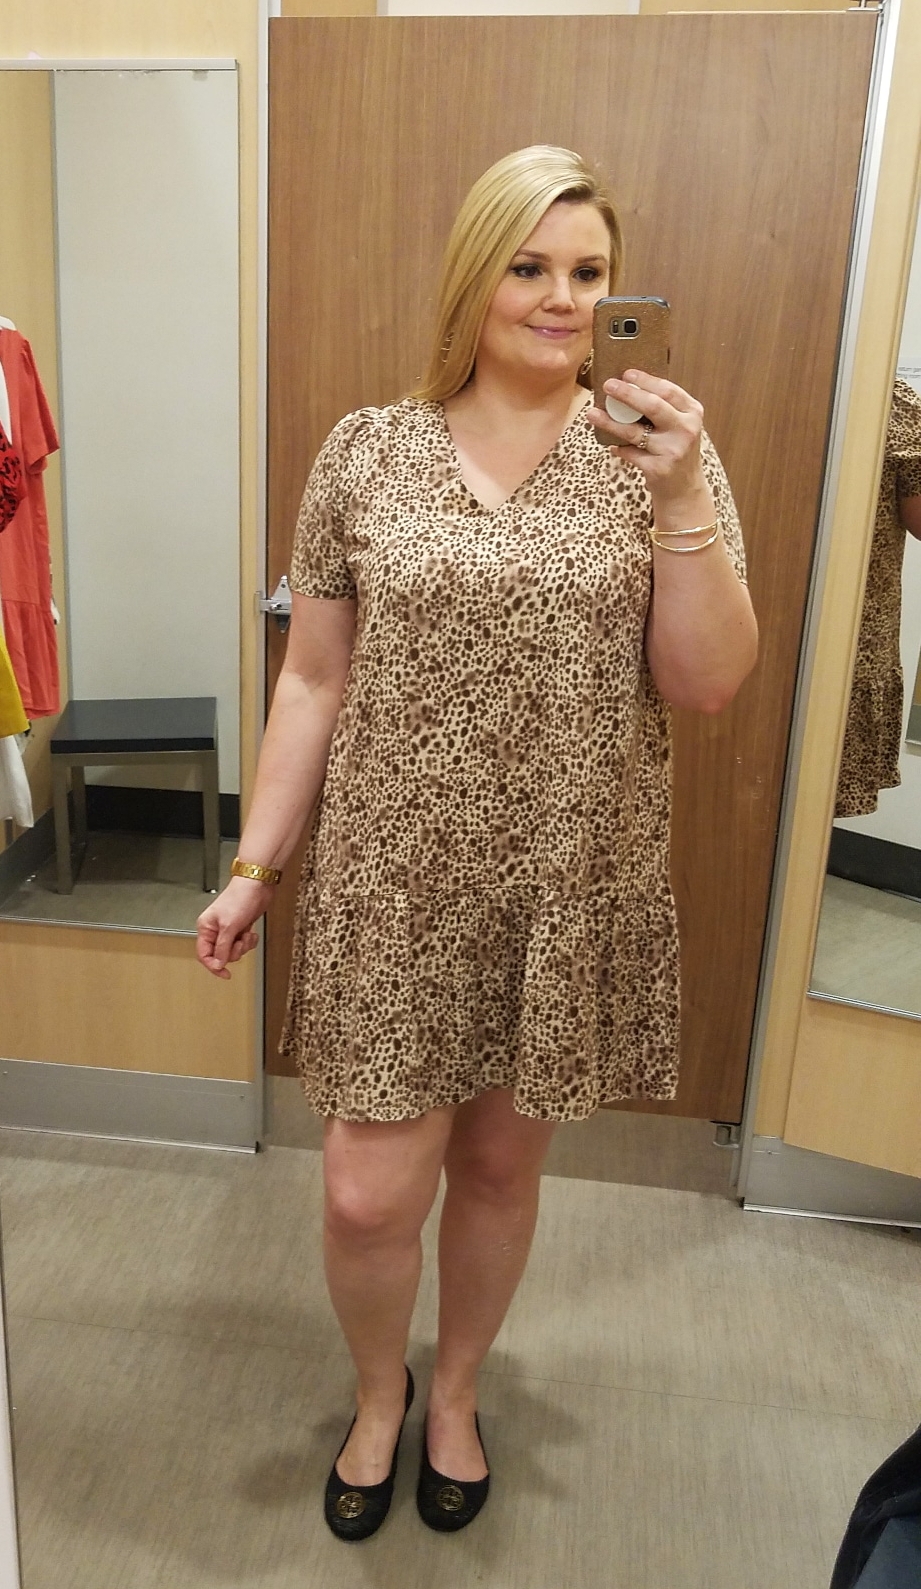 Orlando blogger Emily of Fabulously Overdressed shares spring dresses from Target